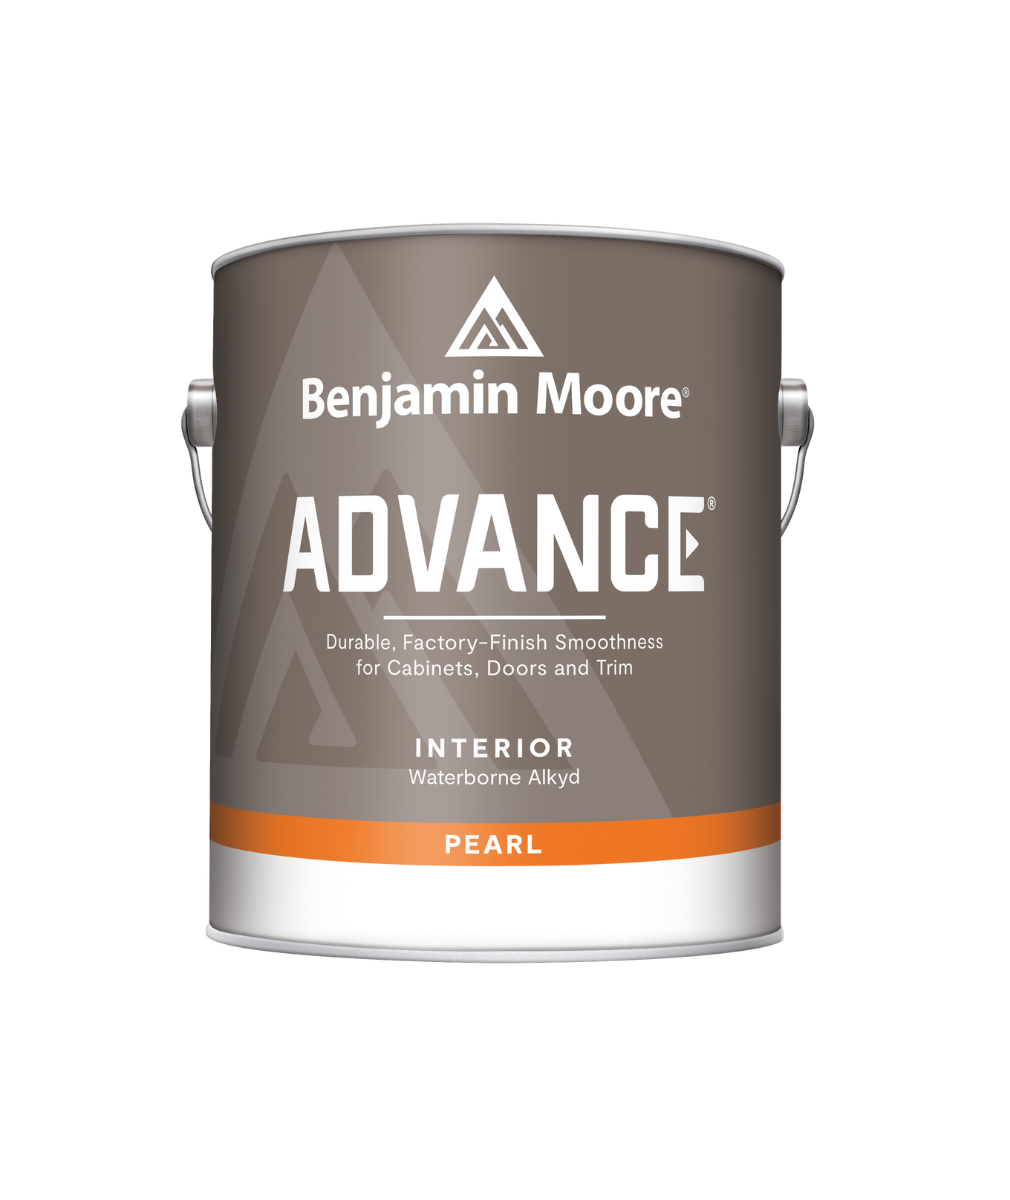 Benjamin Moore Advance Pearl Paint available at Clement's Paint.